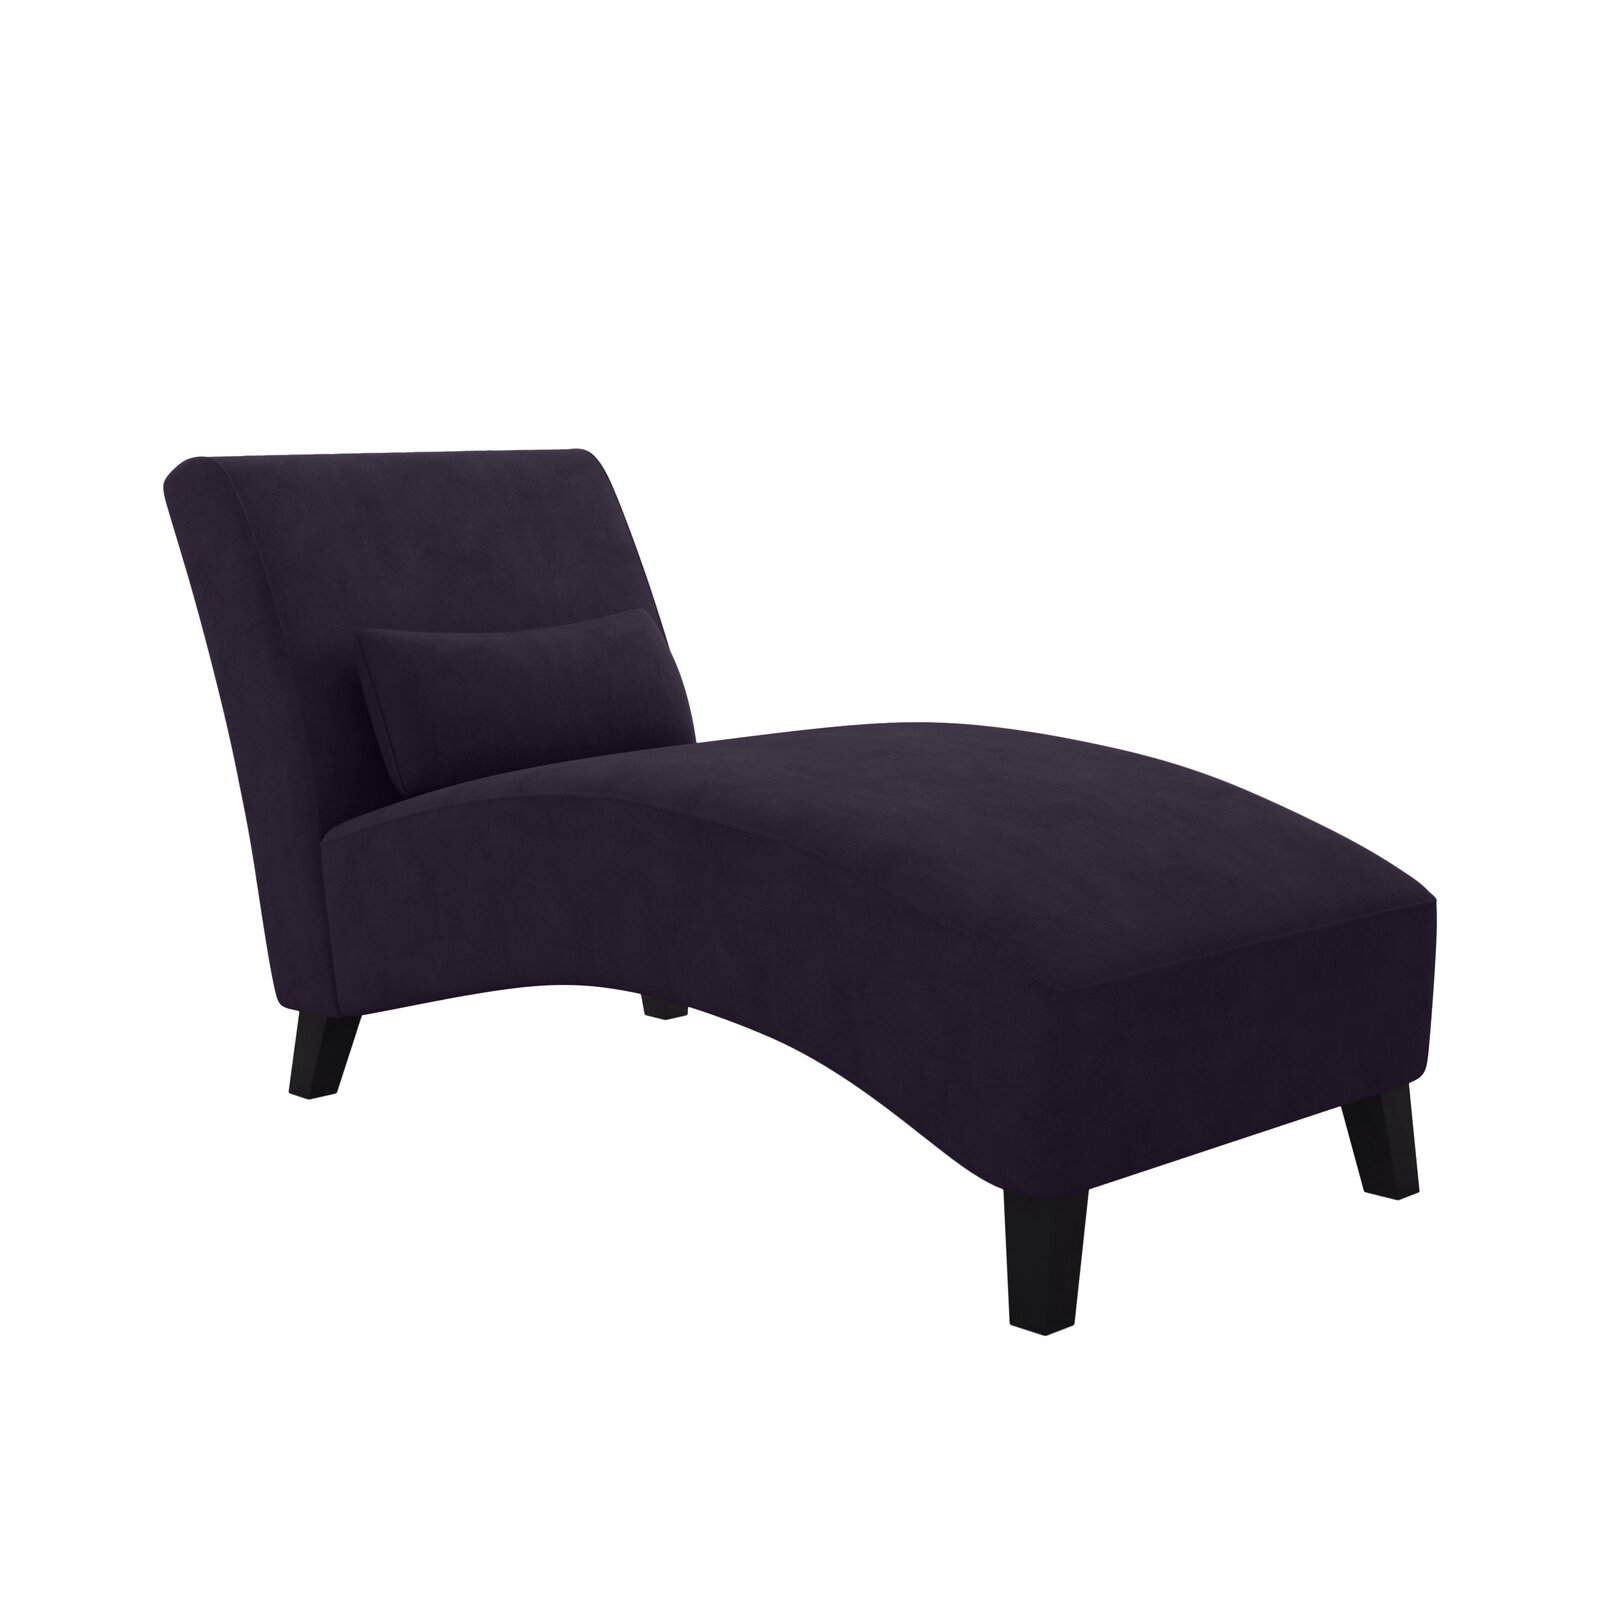 Braemar Armless Chaise Lounge, Weight Capacity: 300 lb., : 32.5'' H x 26.75'' W x 61'' L - image 5 of 5